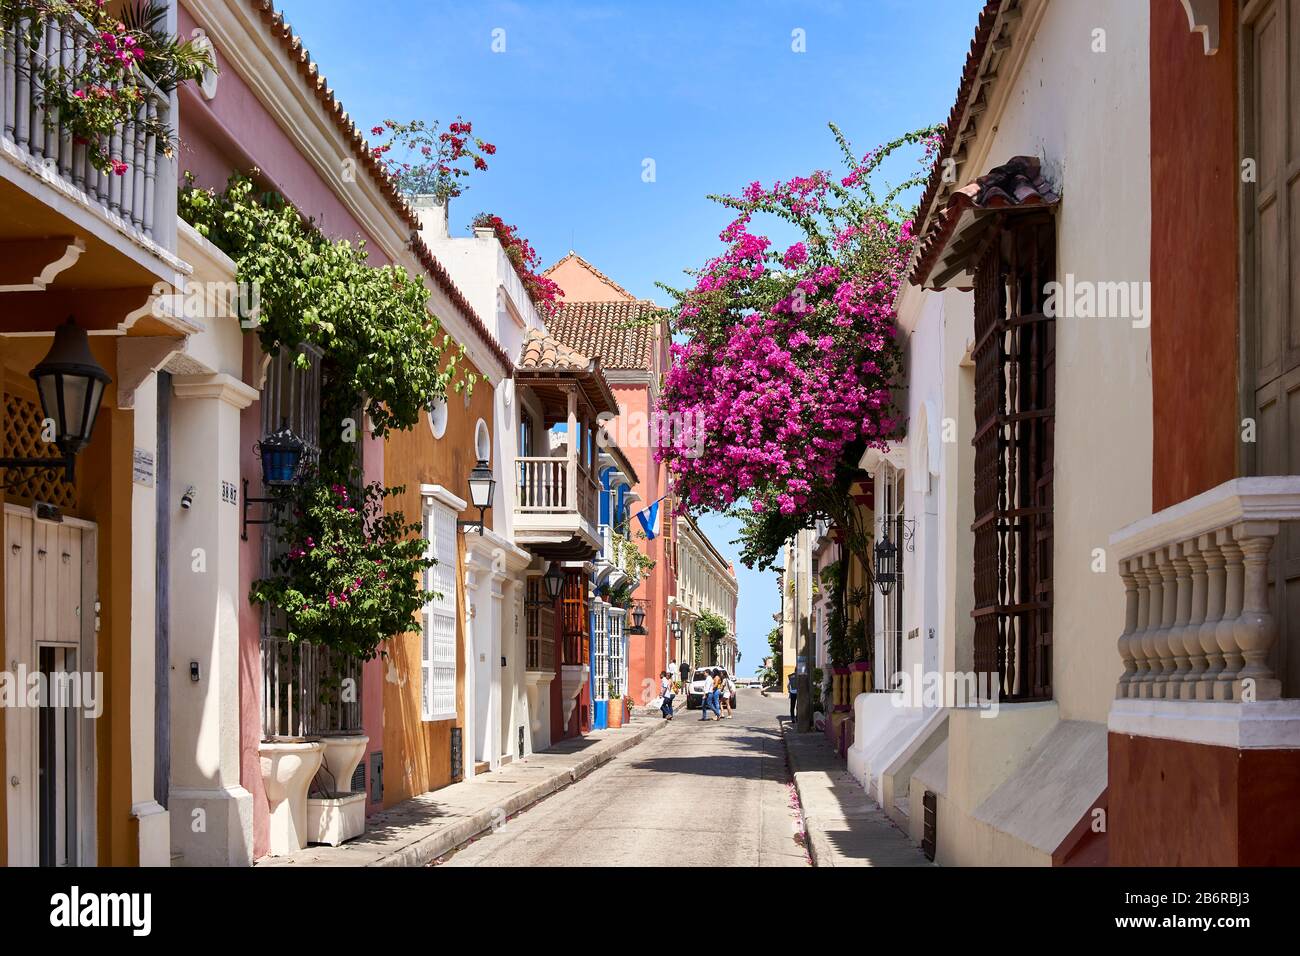 Colourful residential street in Cartagena old town, Colombia Stock Photo